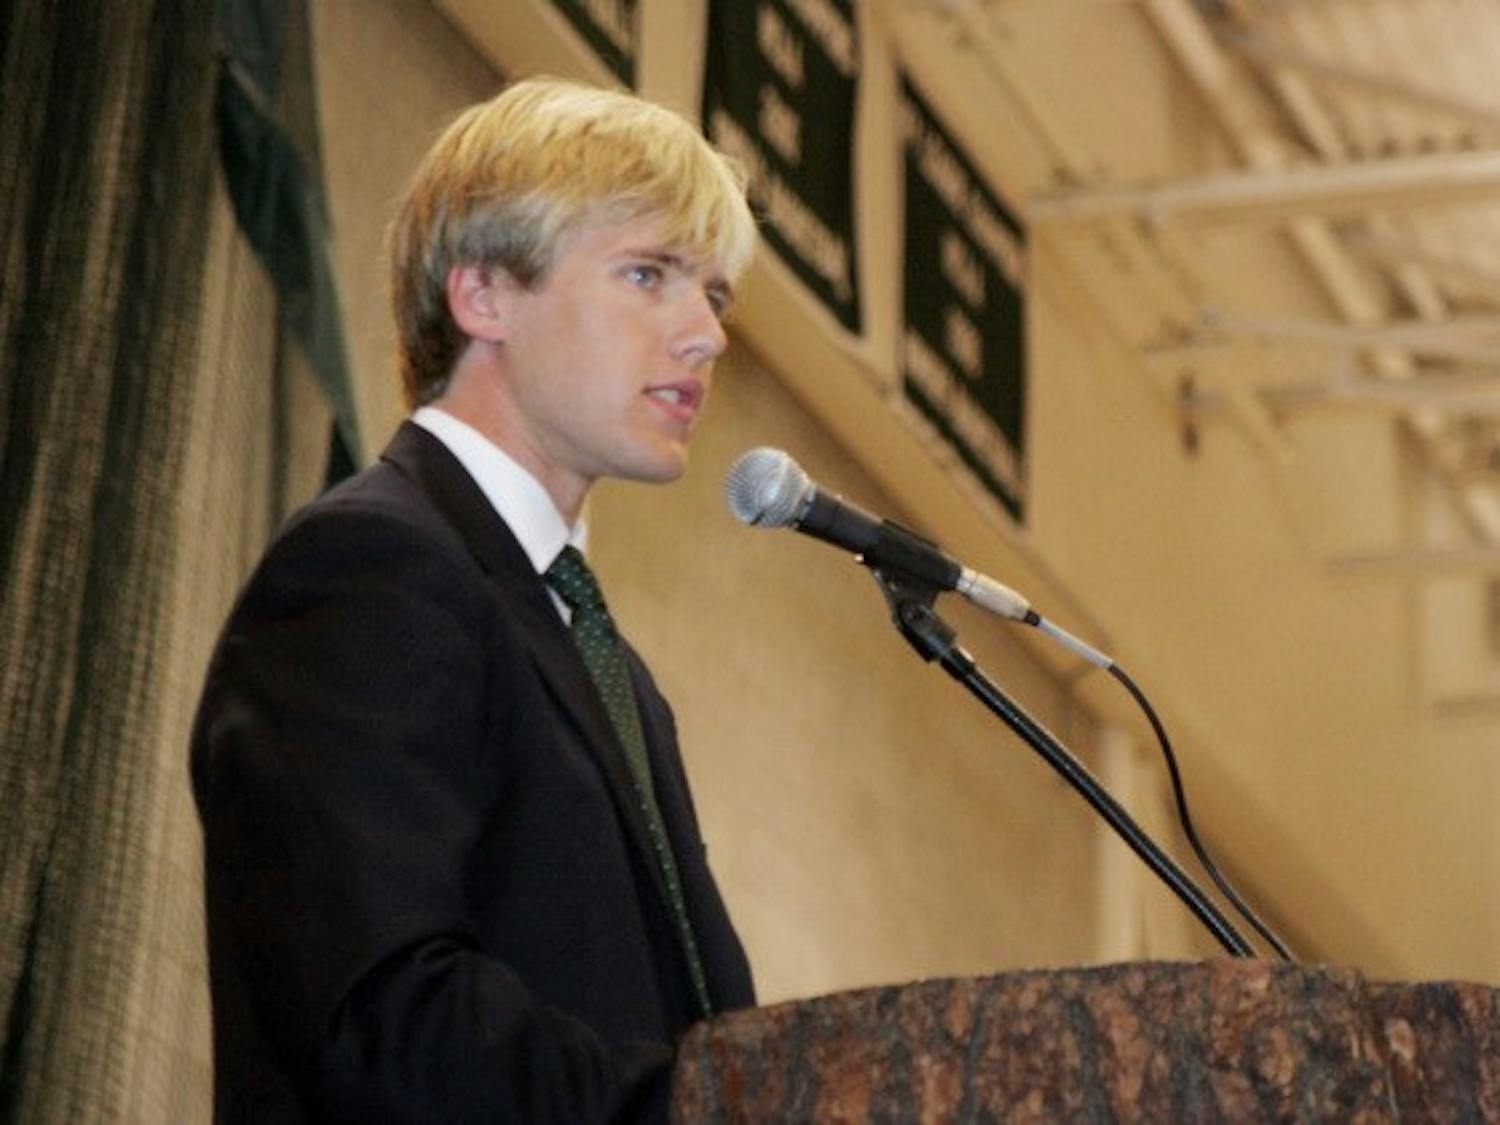 Student Body President Travis Green '08 encouraged freshmen to carve out their own identities in college at Convocation Tuesday, held in Leede Arena.